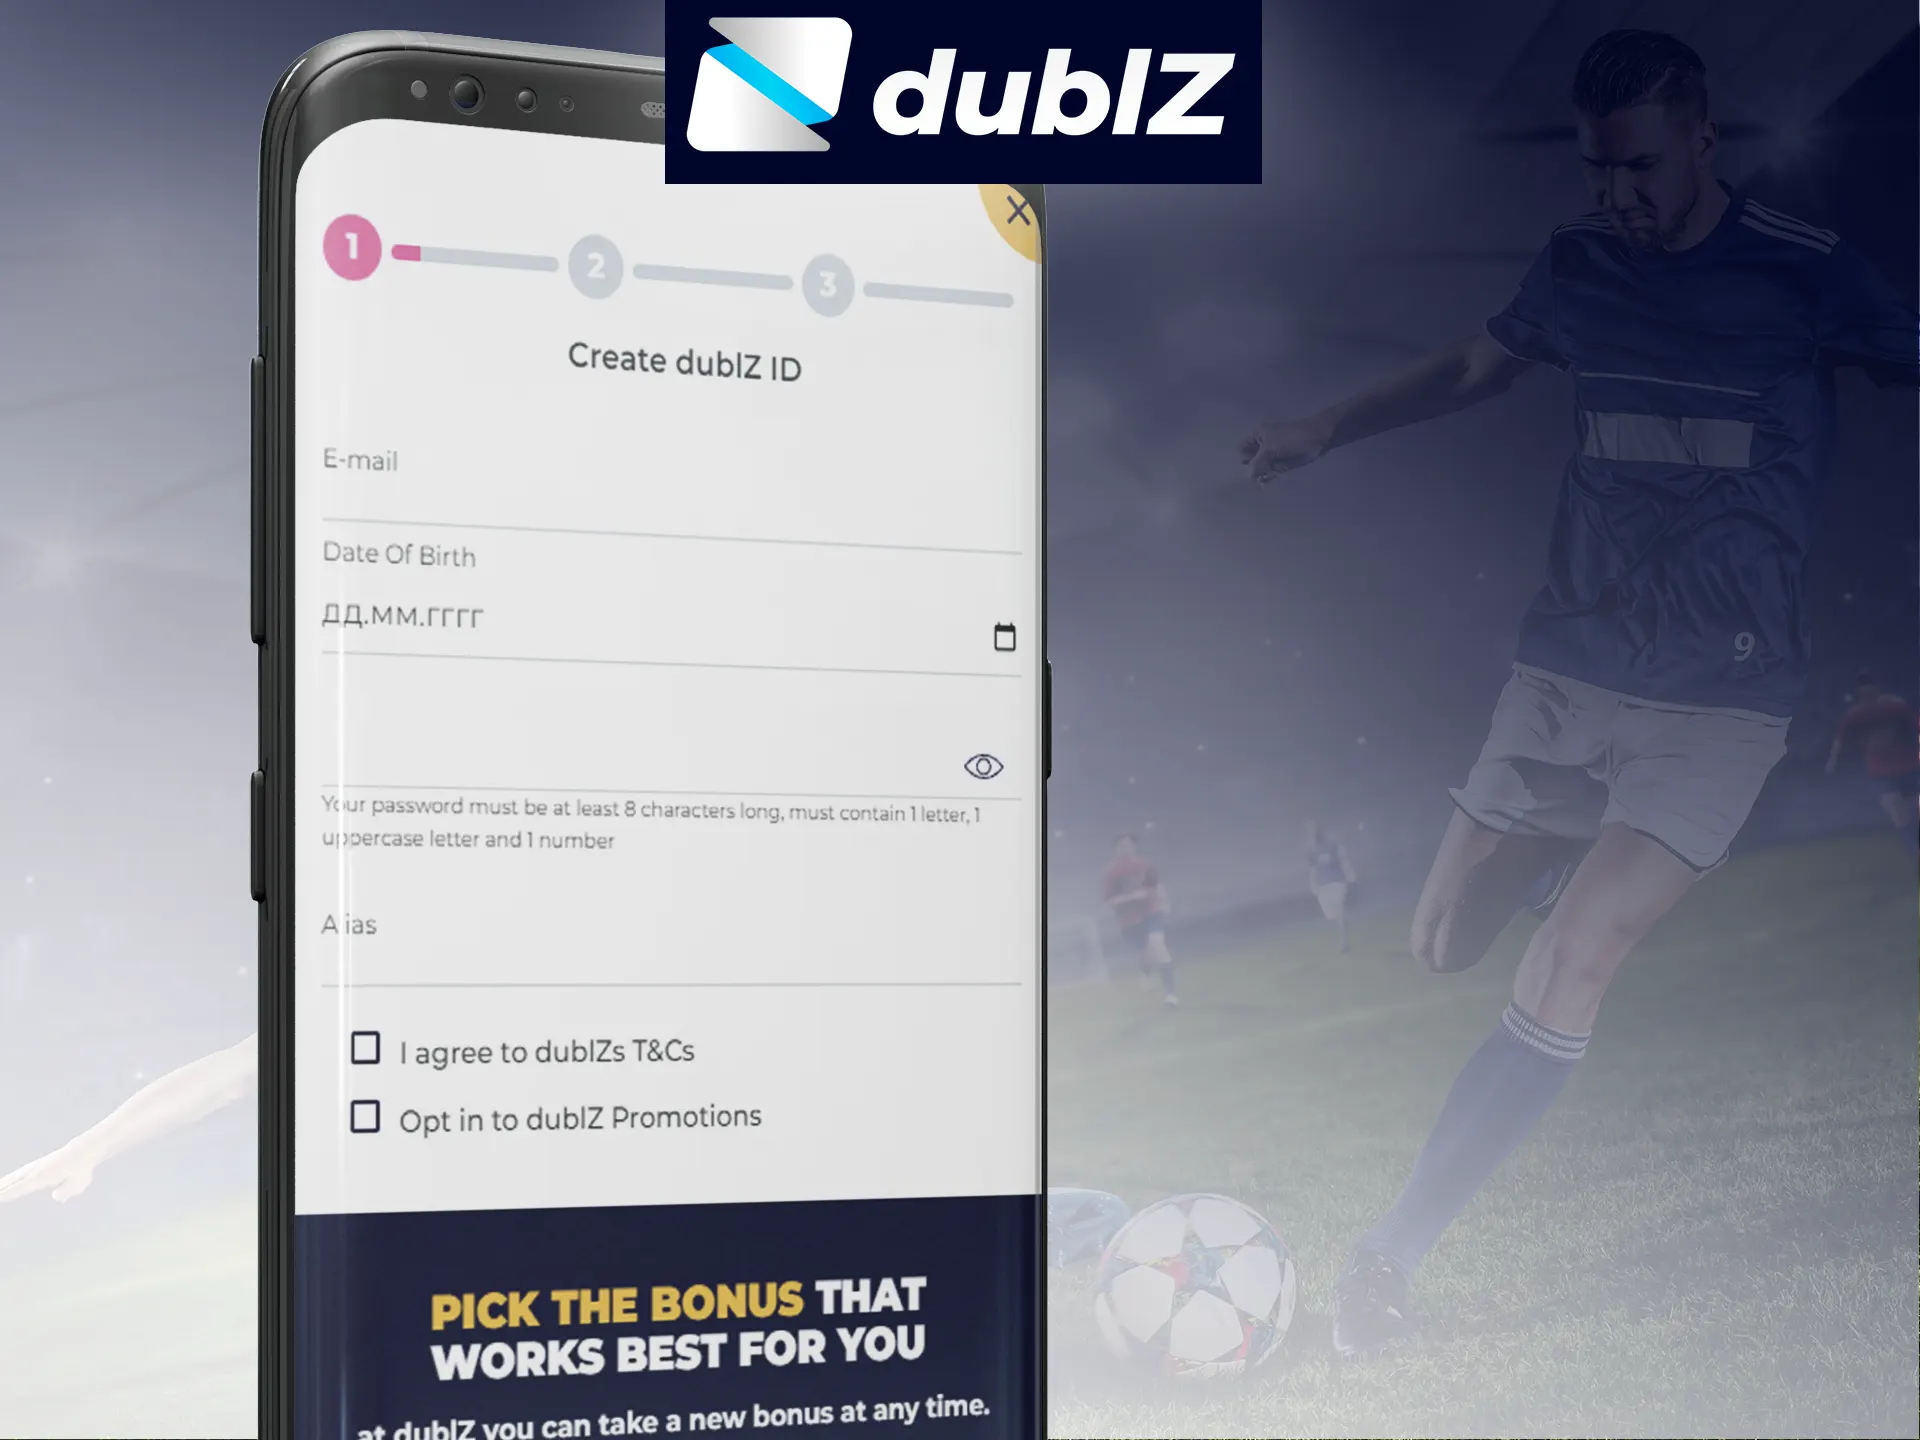 In the Dublz app, go through a simple registration process.